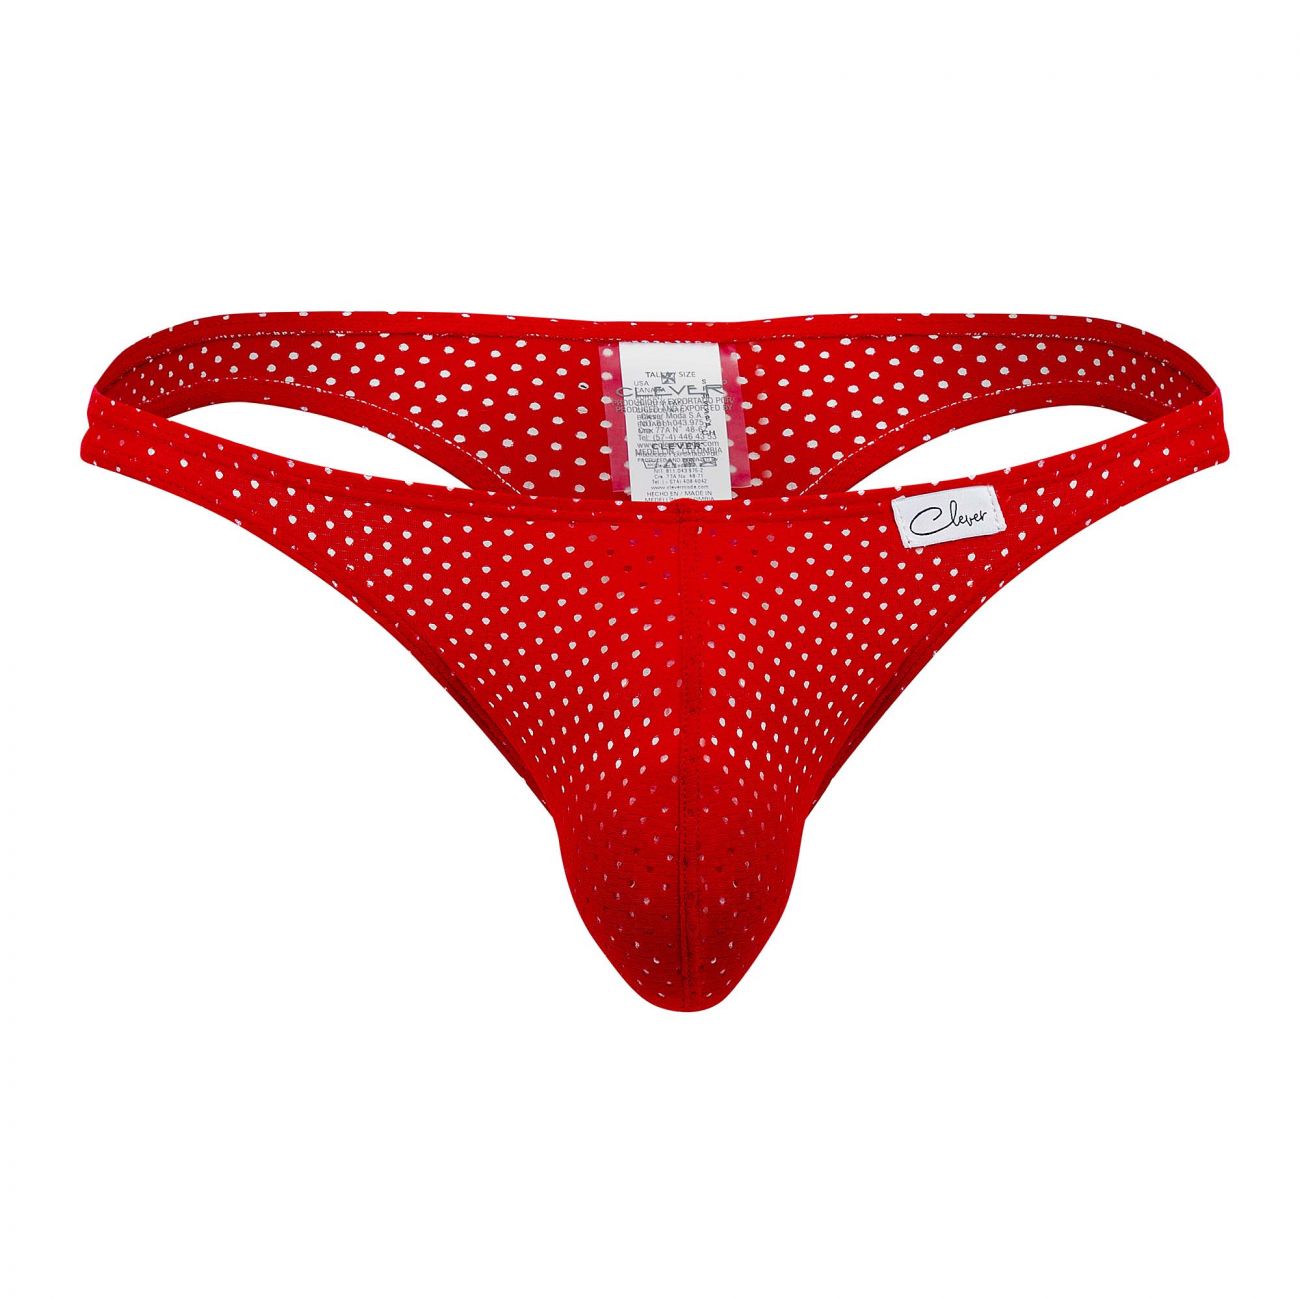 Clever 0931 Guard Thongs Red